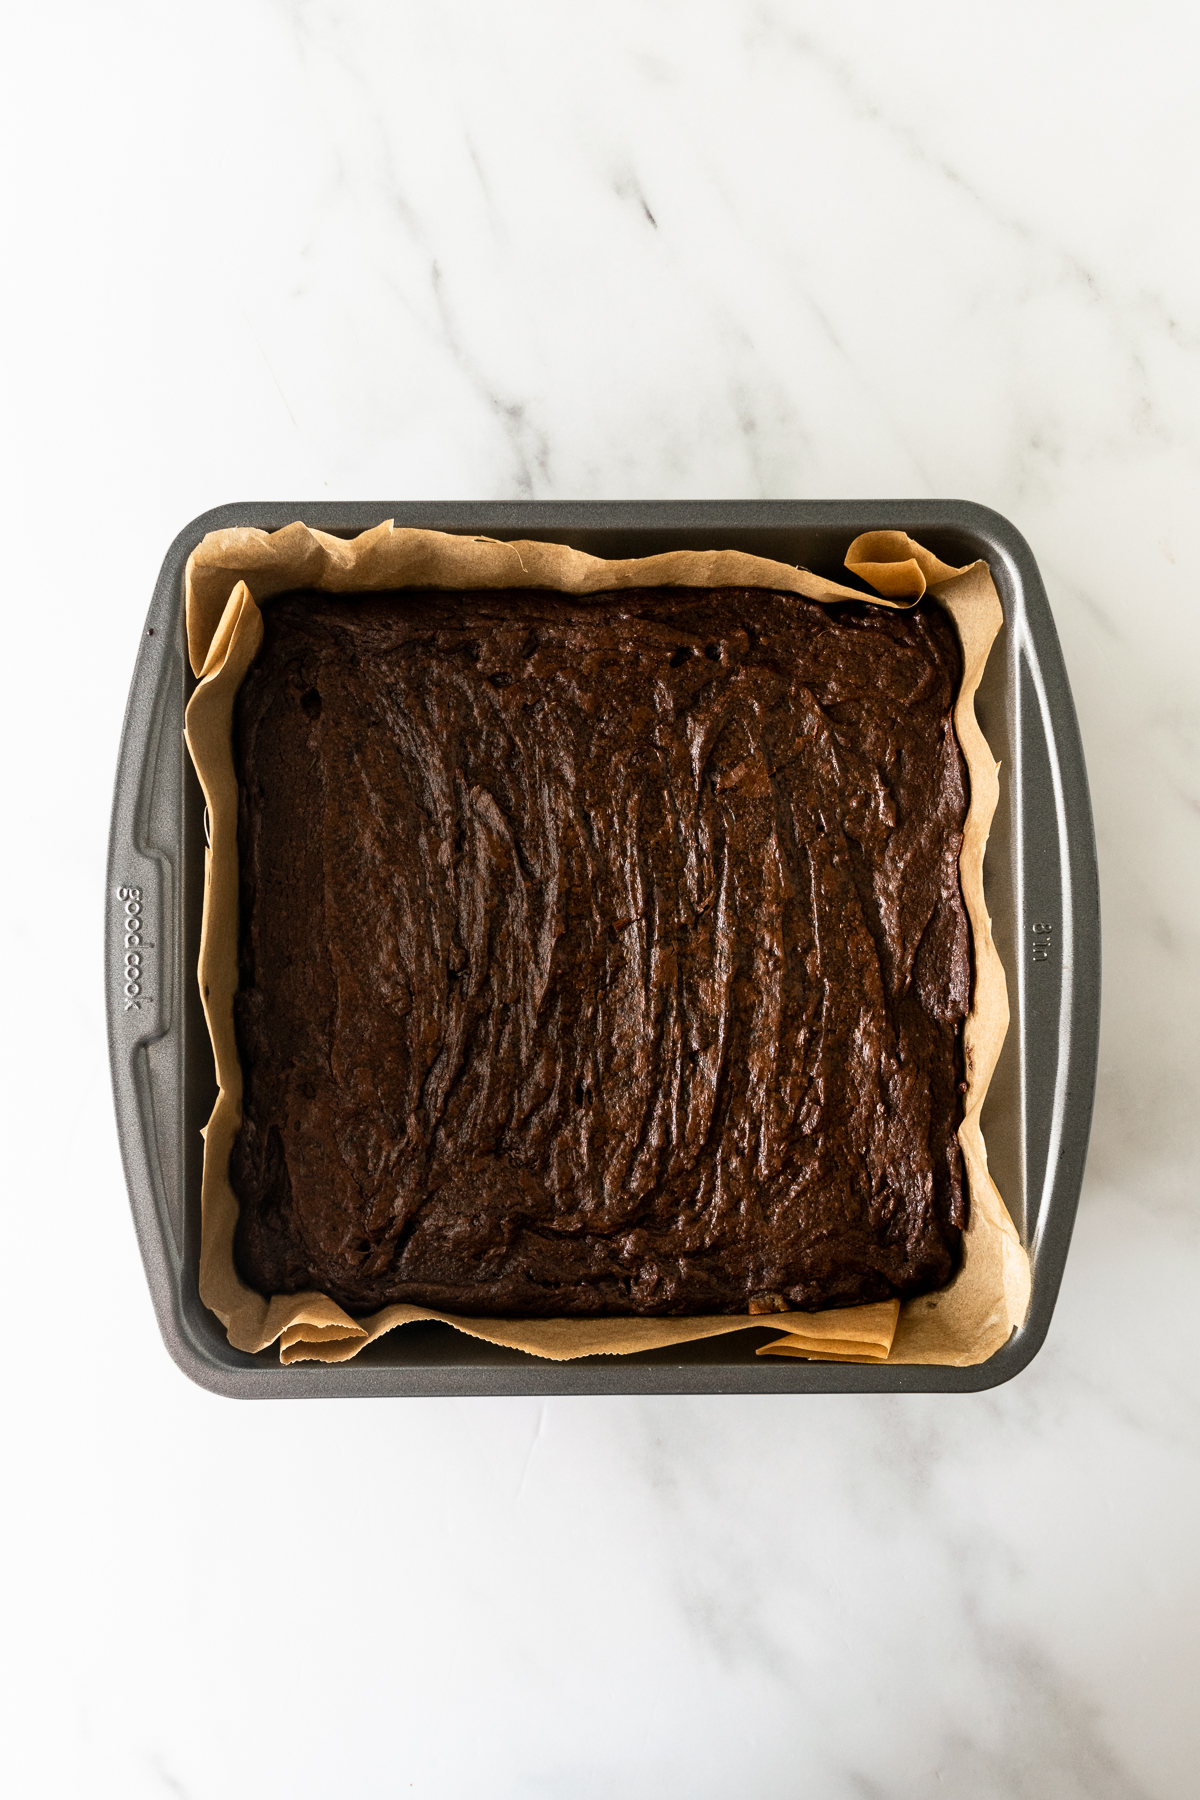 baked brownies in a square baking pan lined with parchment paper.